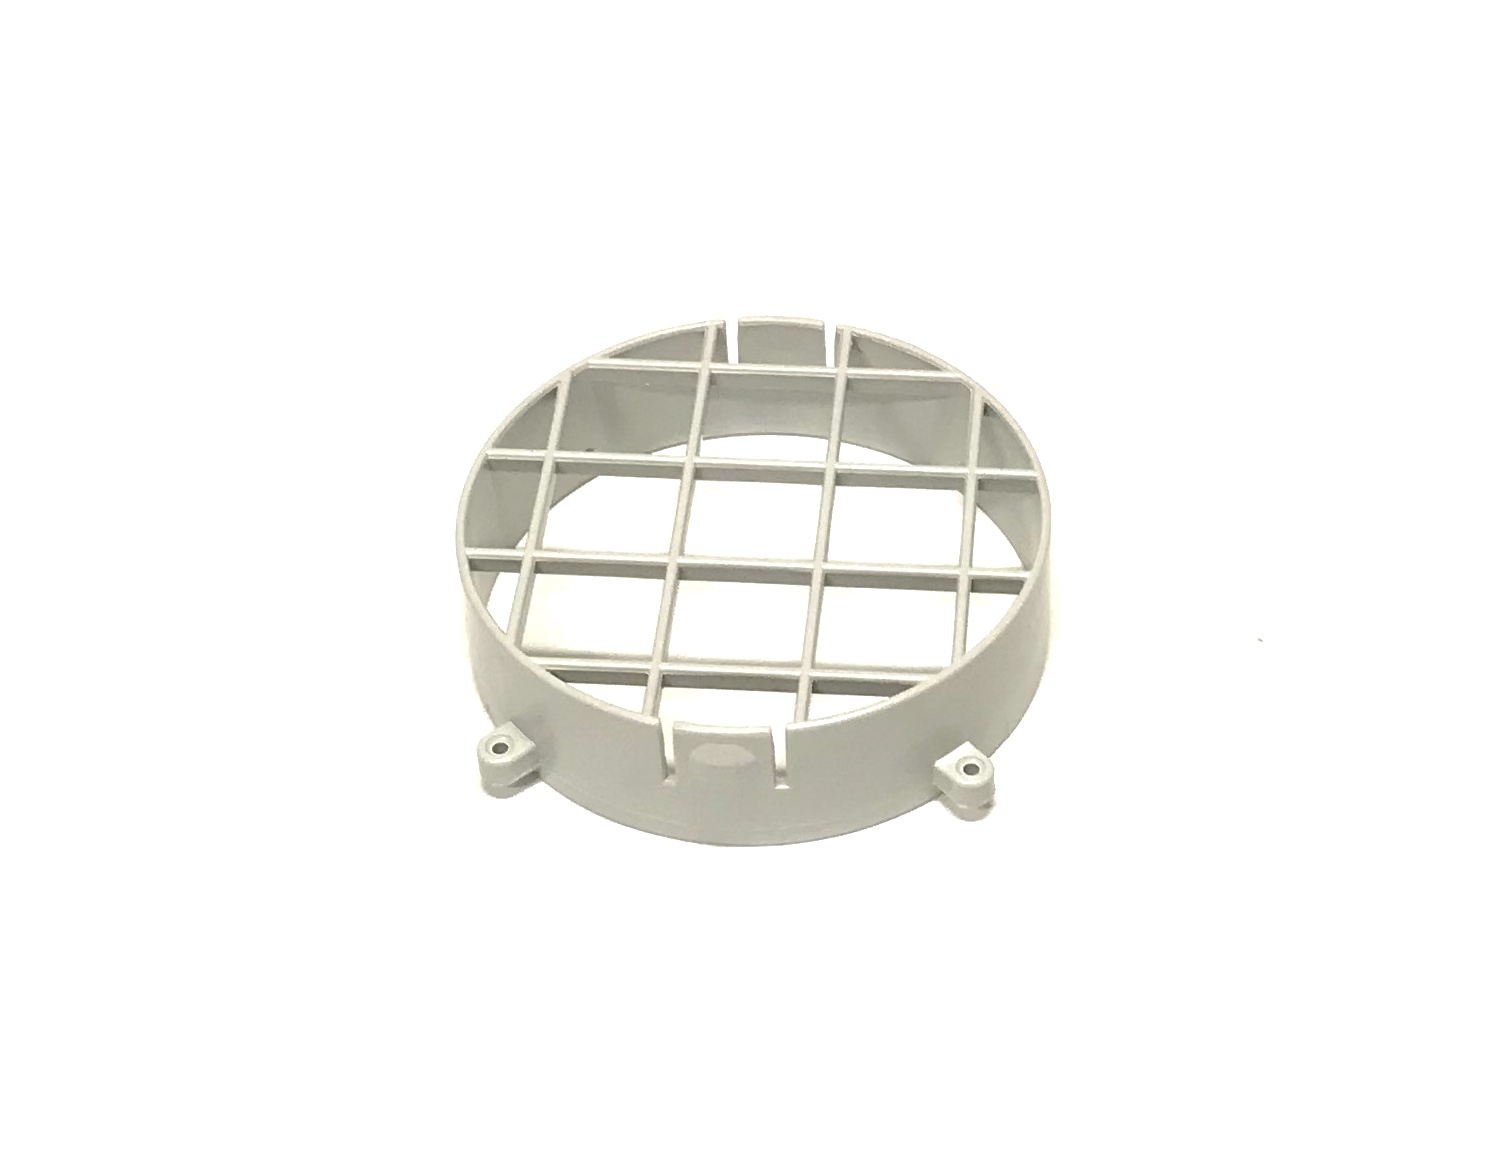 Danby OEM Danby Off White Exhaust Grill Cover Adapter Originally Shipped With DPAC10011, DPAC11010, DPAC11012